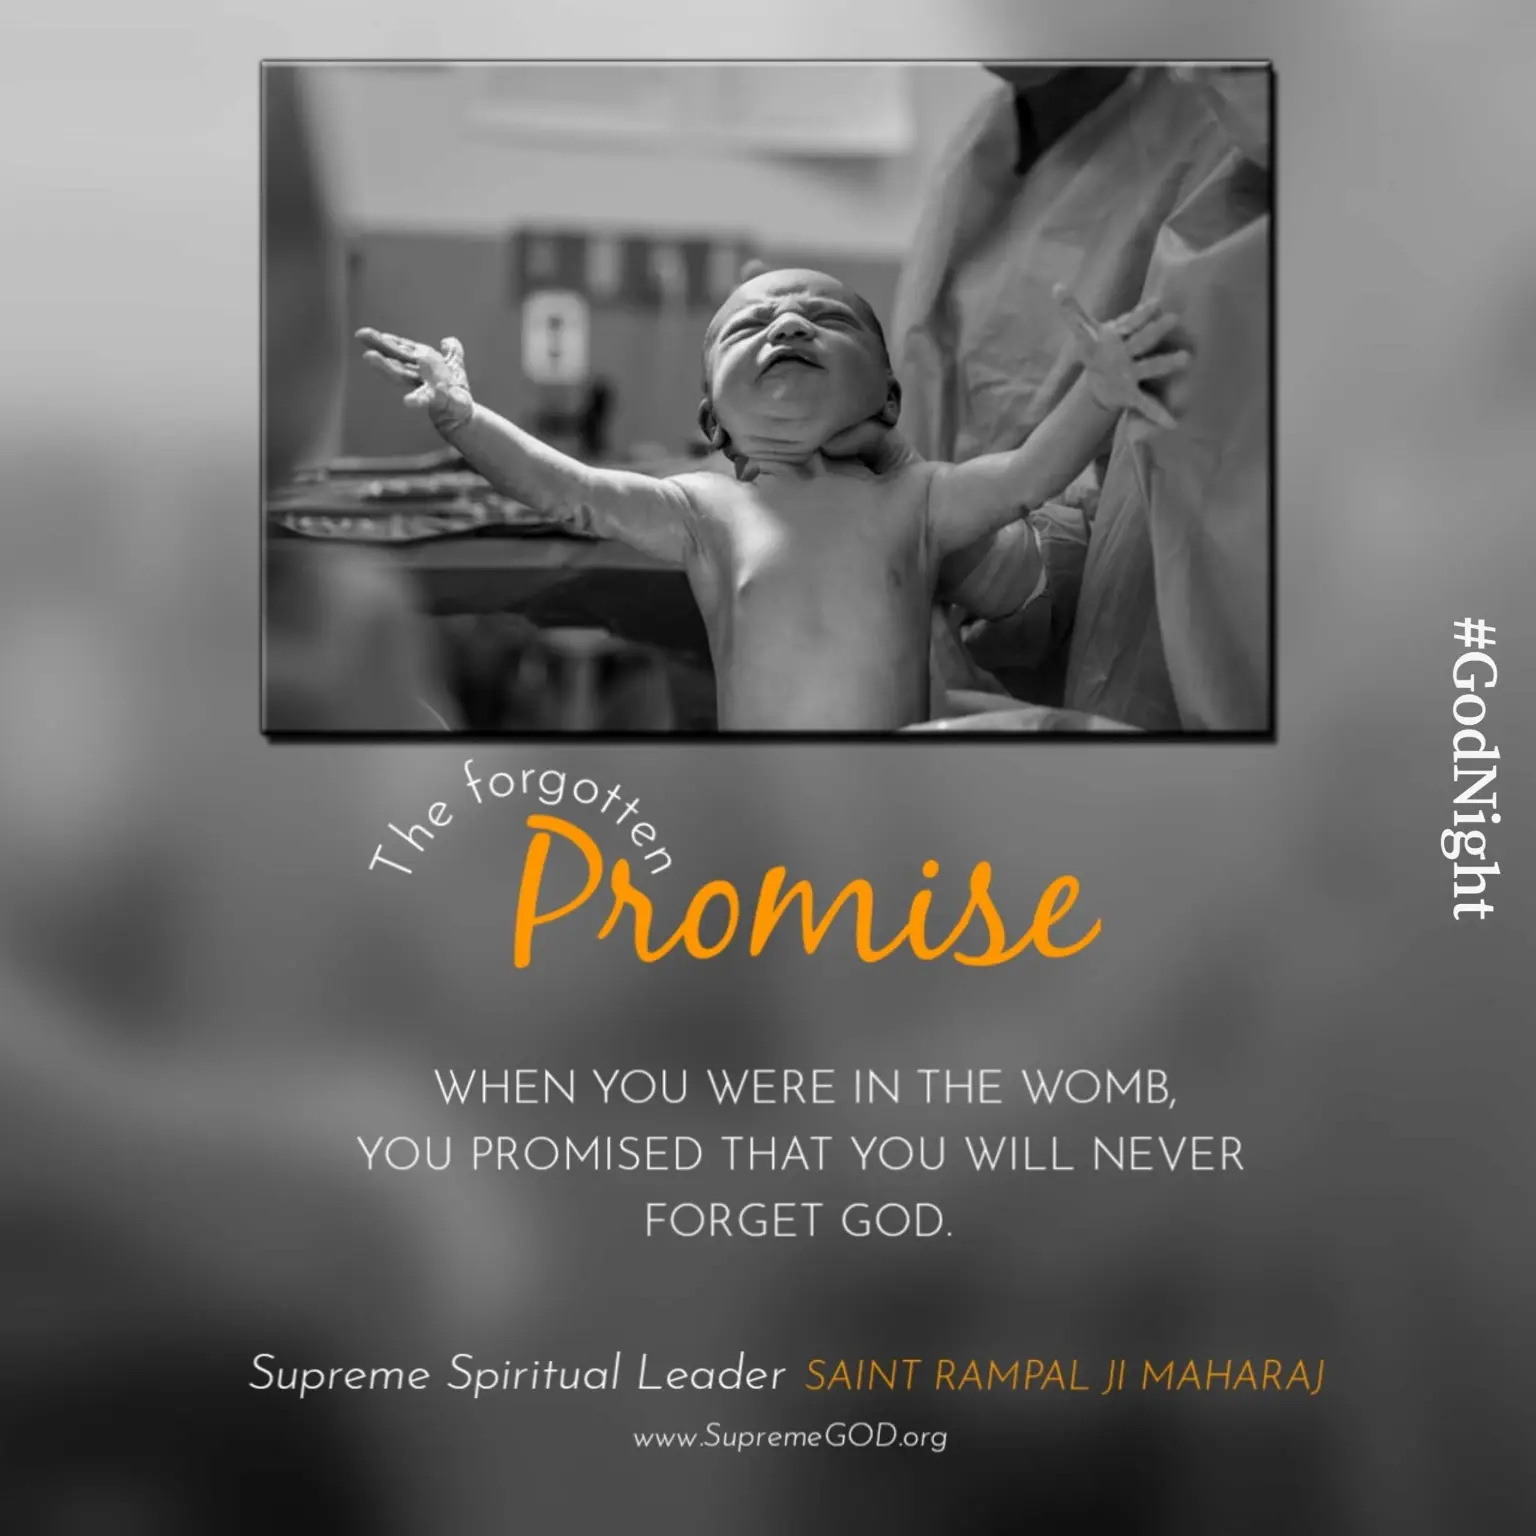 You have forgotten the promise that you were made in the mother womb from God, that you never forget God. #SantRampalJiMaharajQuotes #GodMorning #Quotes #SpiritualQuotes #SantRampalJiQuotes